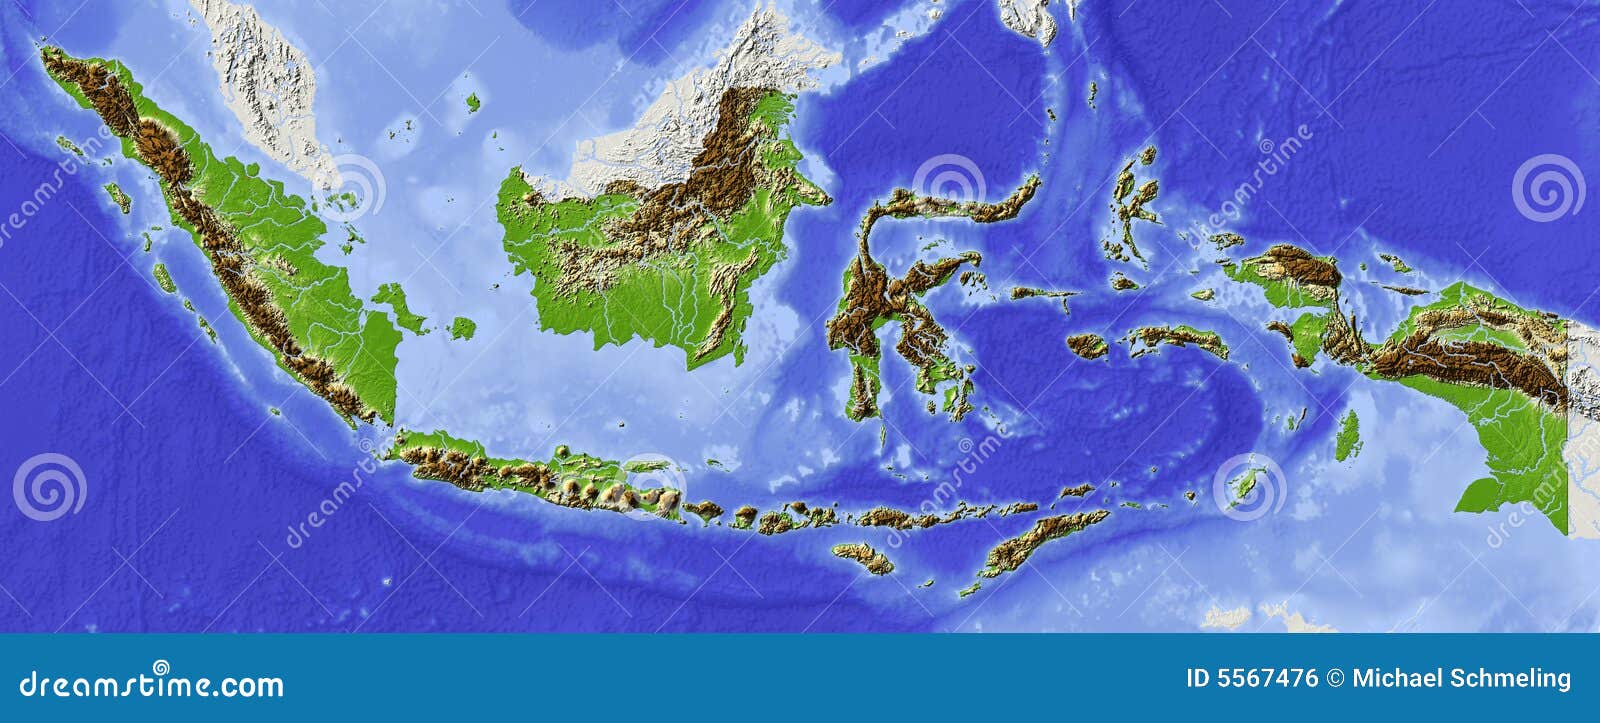 Indonesia, relief map stock illustration. Illustration of asia - 5567476